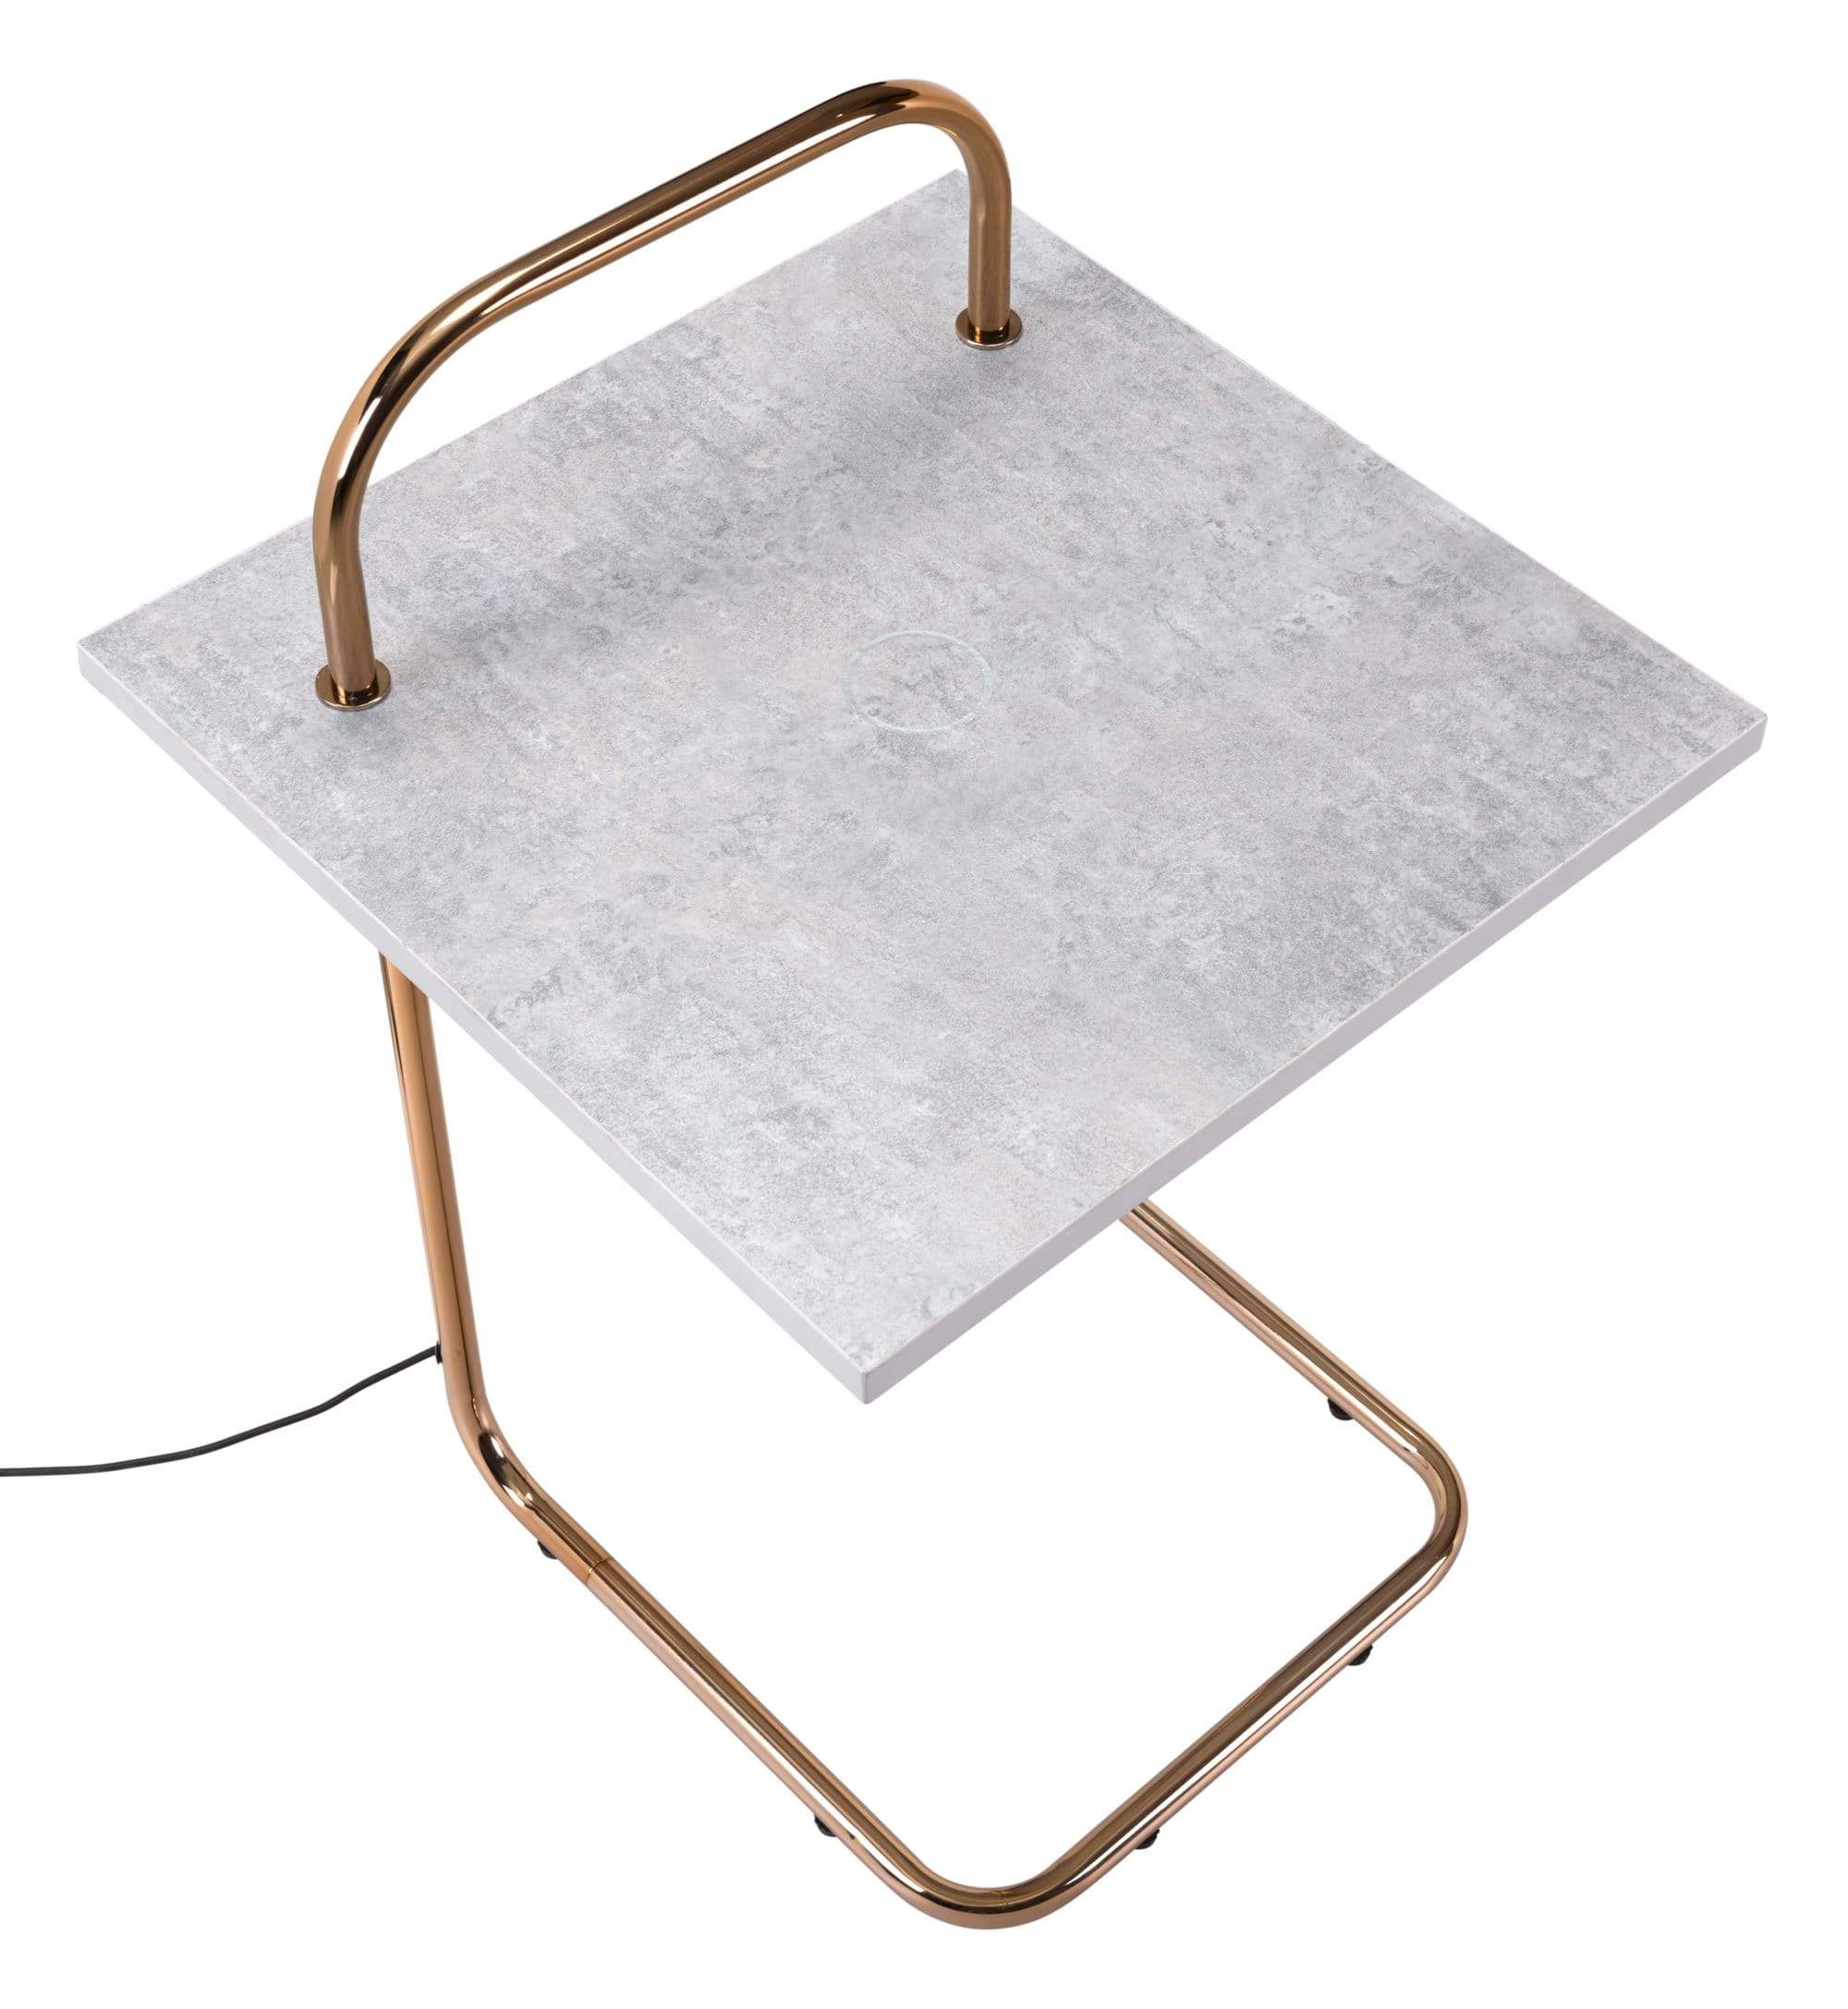 HomeRoots Outdoors Outdoor Furniture > Outdoor Tables Gray & Gold / Formica, Steel 15.7" x 15.7" x 29.7" Gray & Gold, Formica, Steel, Wireless Charging Side Table